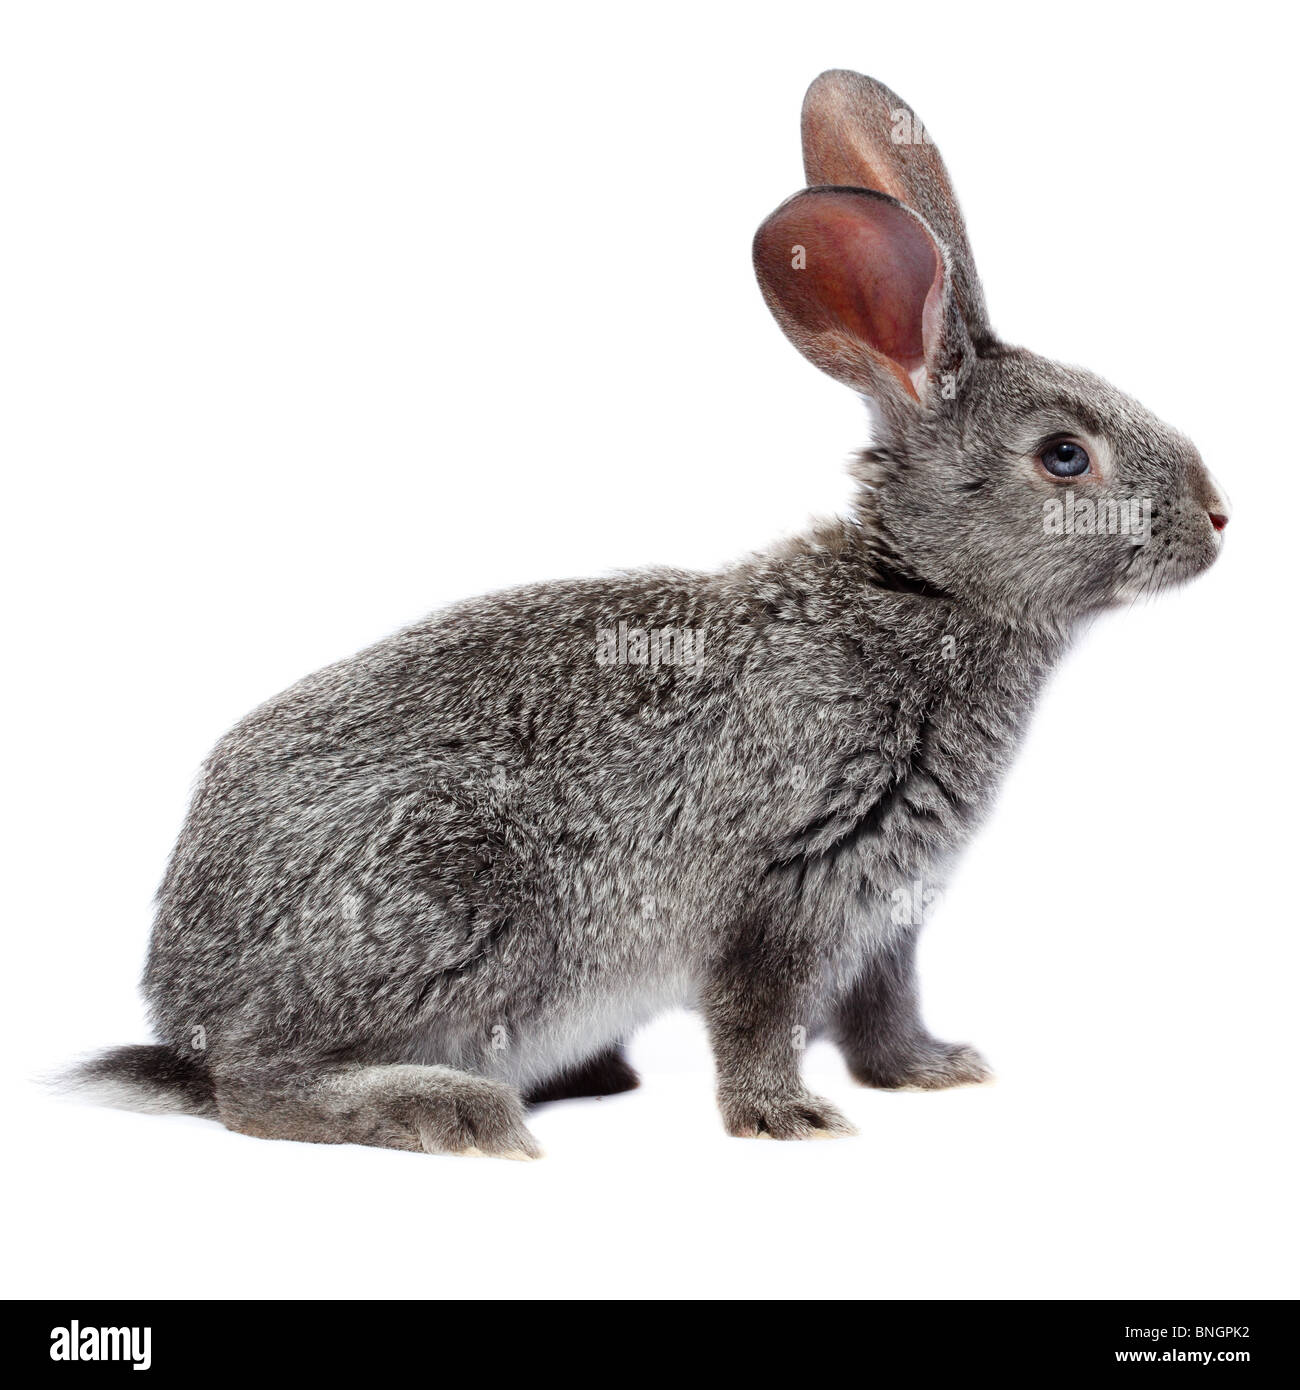 Rabbit in studio against a white background. Stock Photo